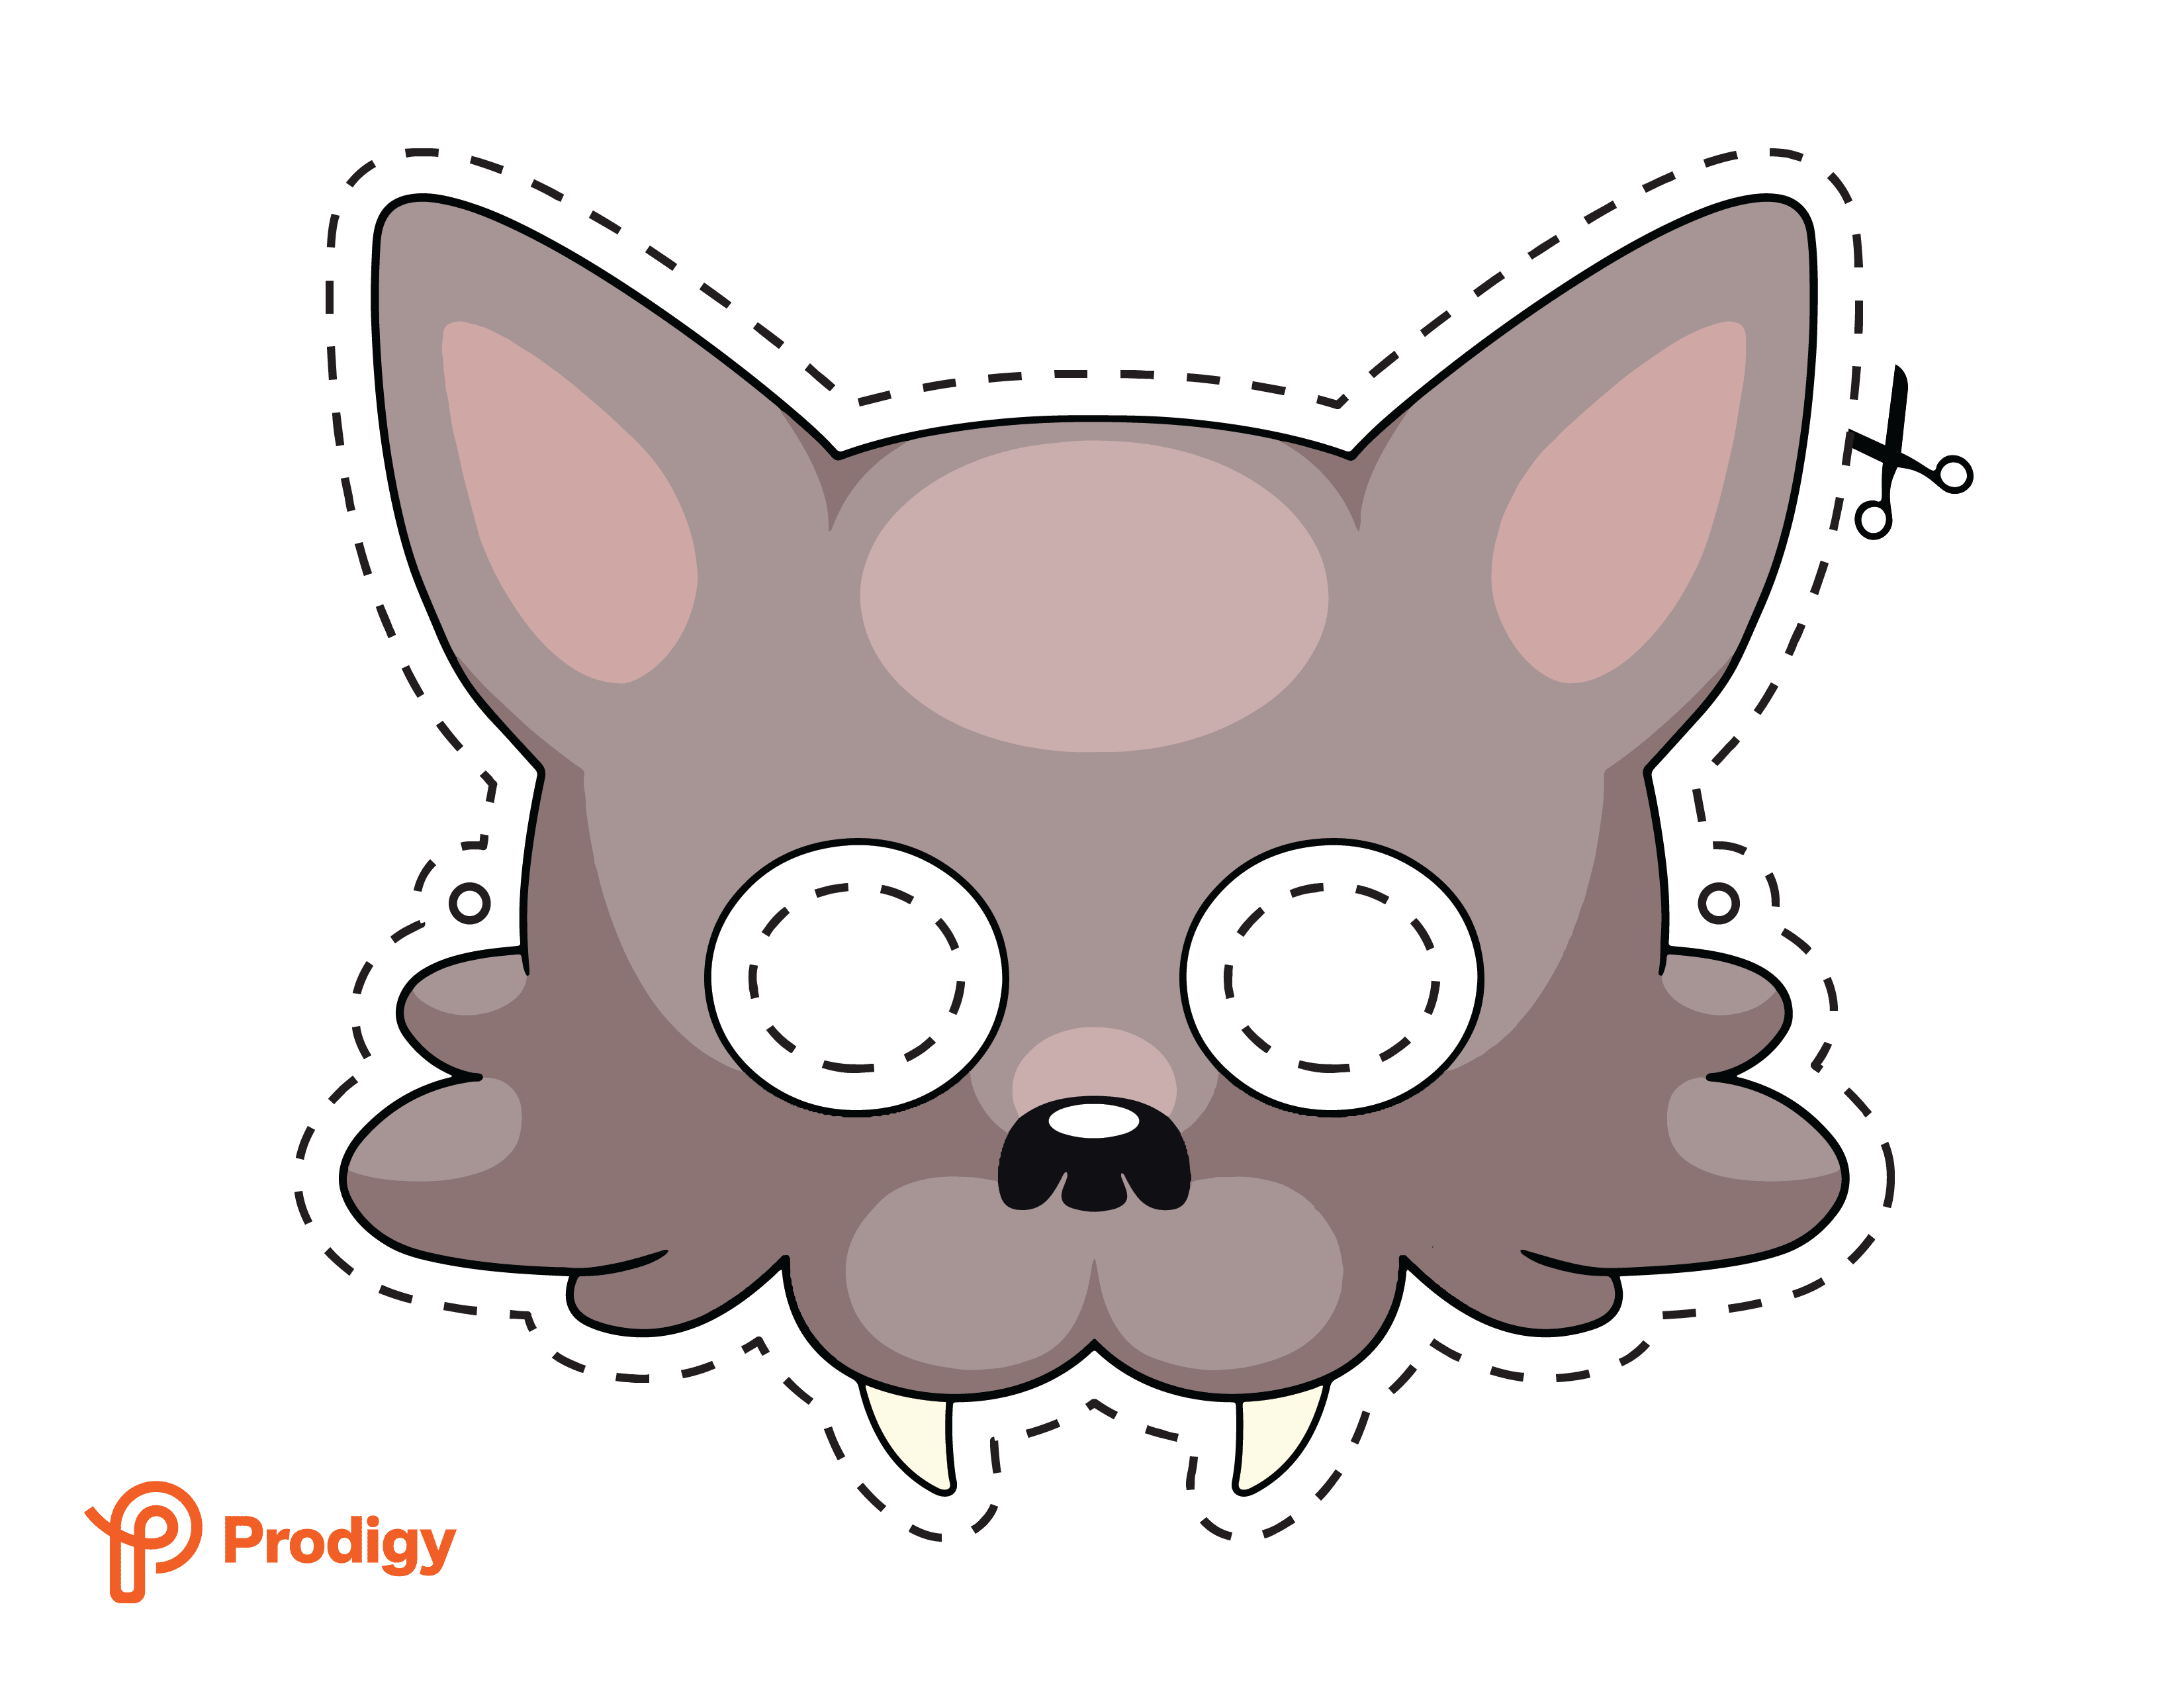 Printable Prodigy werewolf mask in color